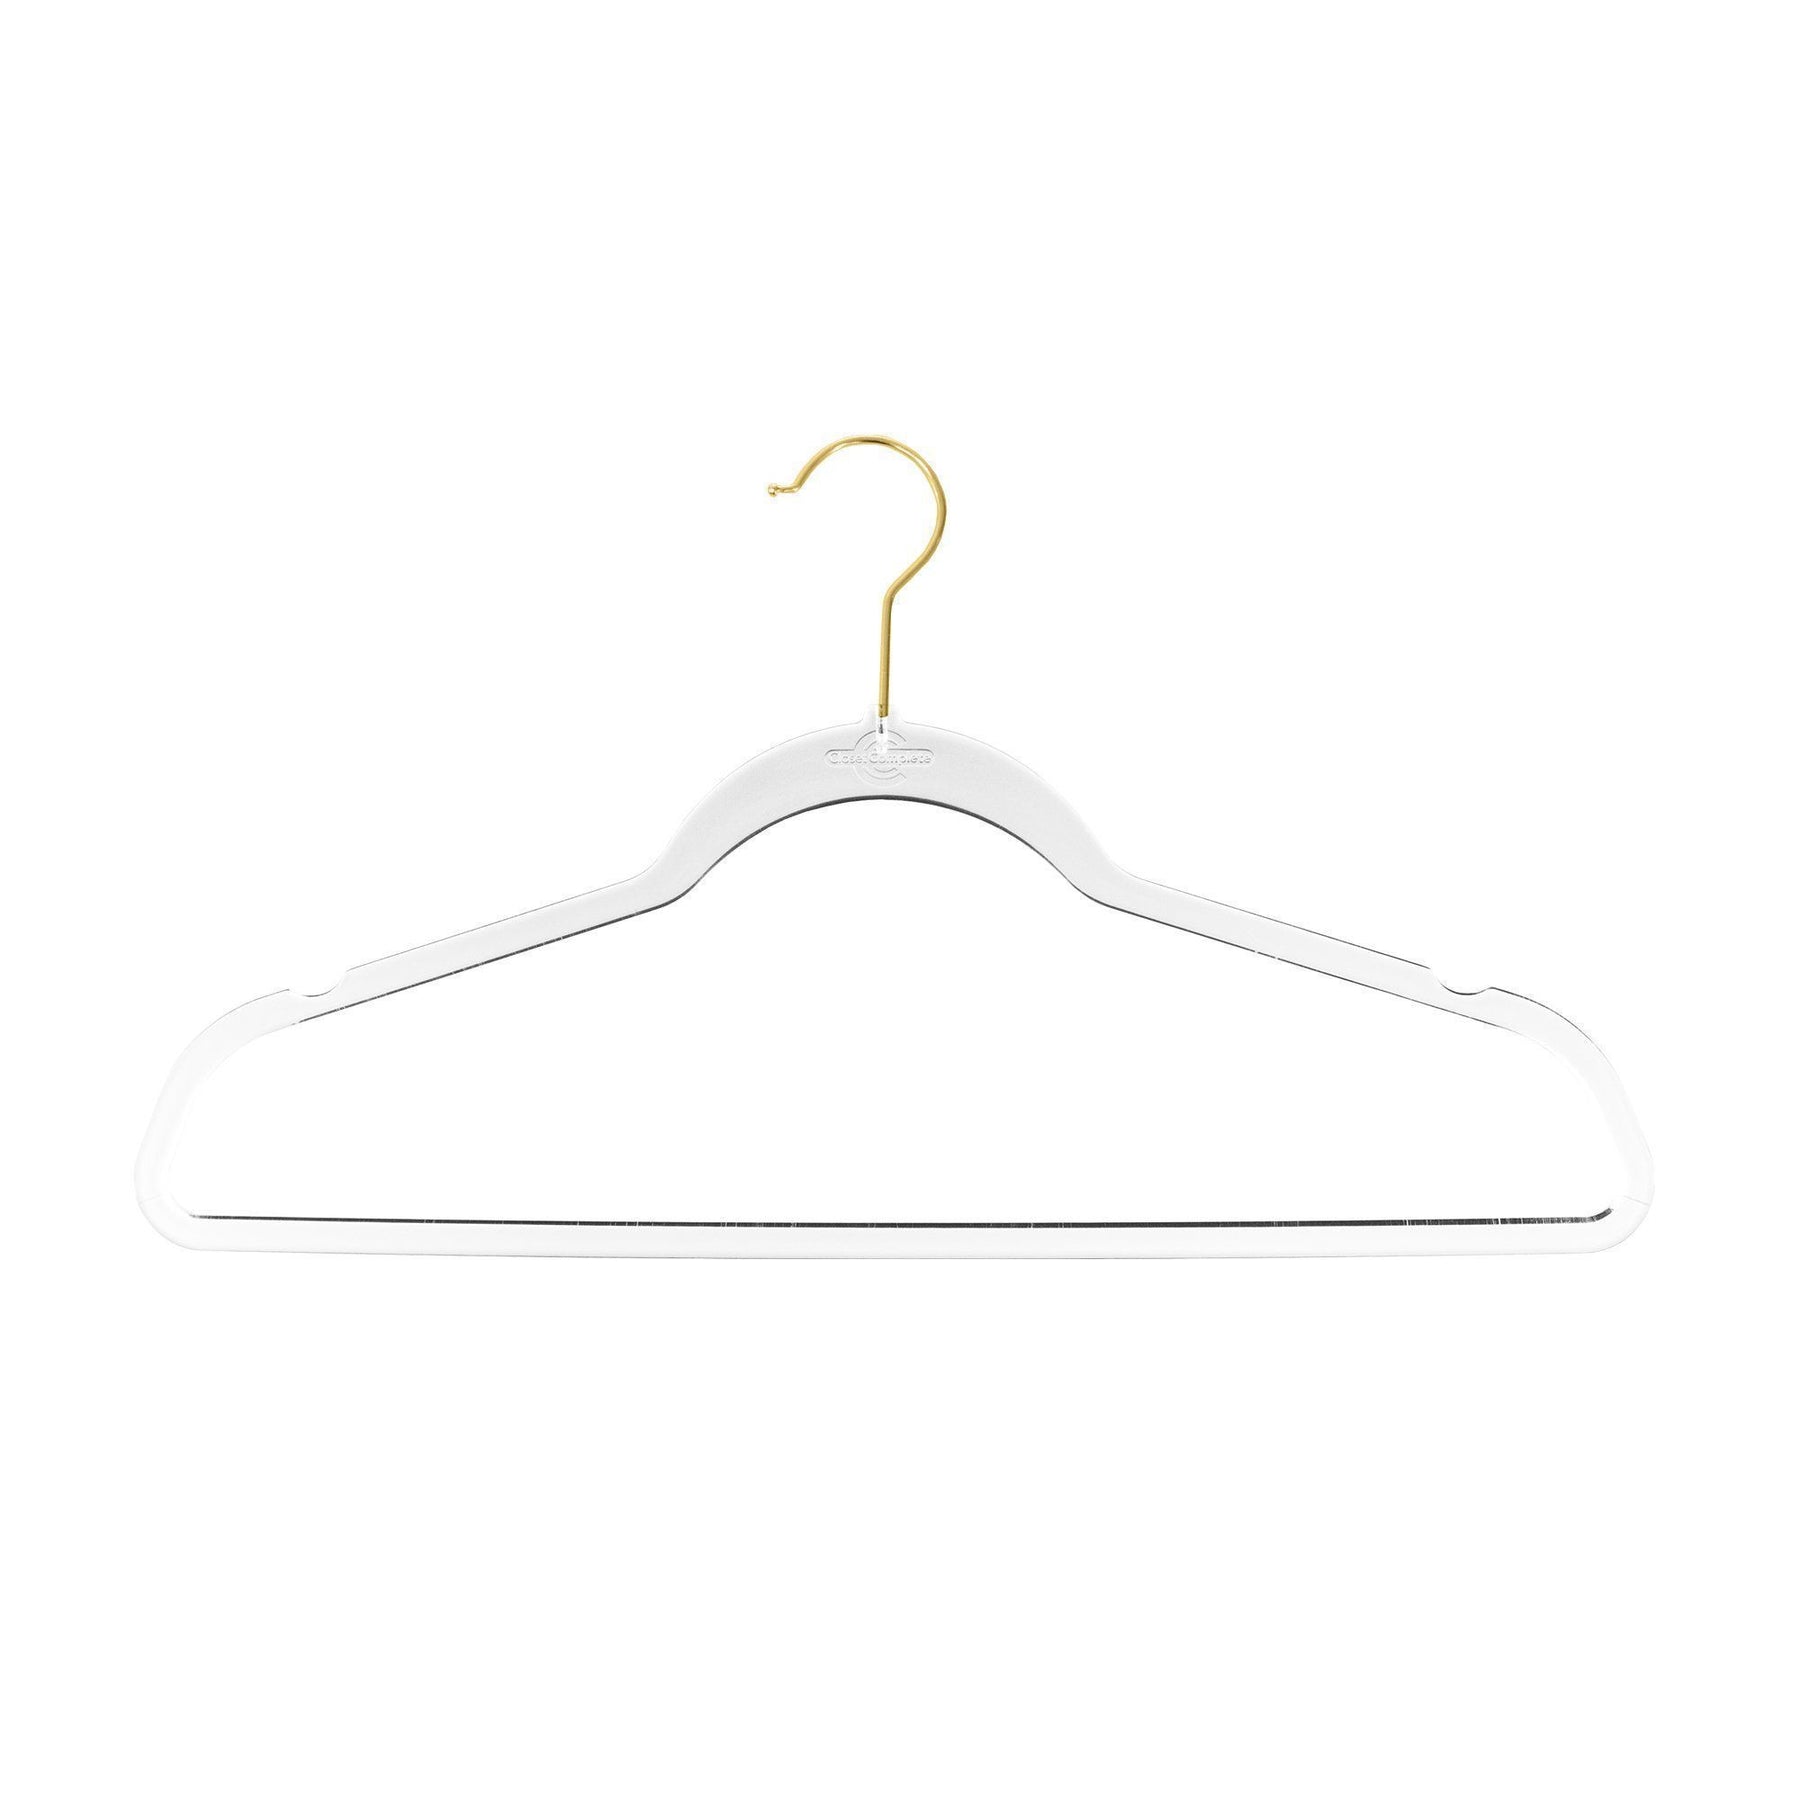 https://cdn.shopify.com/s/files/1/2993/5404/products/closet-complete-acrylic-hangers-completely-clear-invisible-acrylic-hangers-69185-7162350862421_1800x1800.jpg?v=1552518837